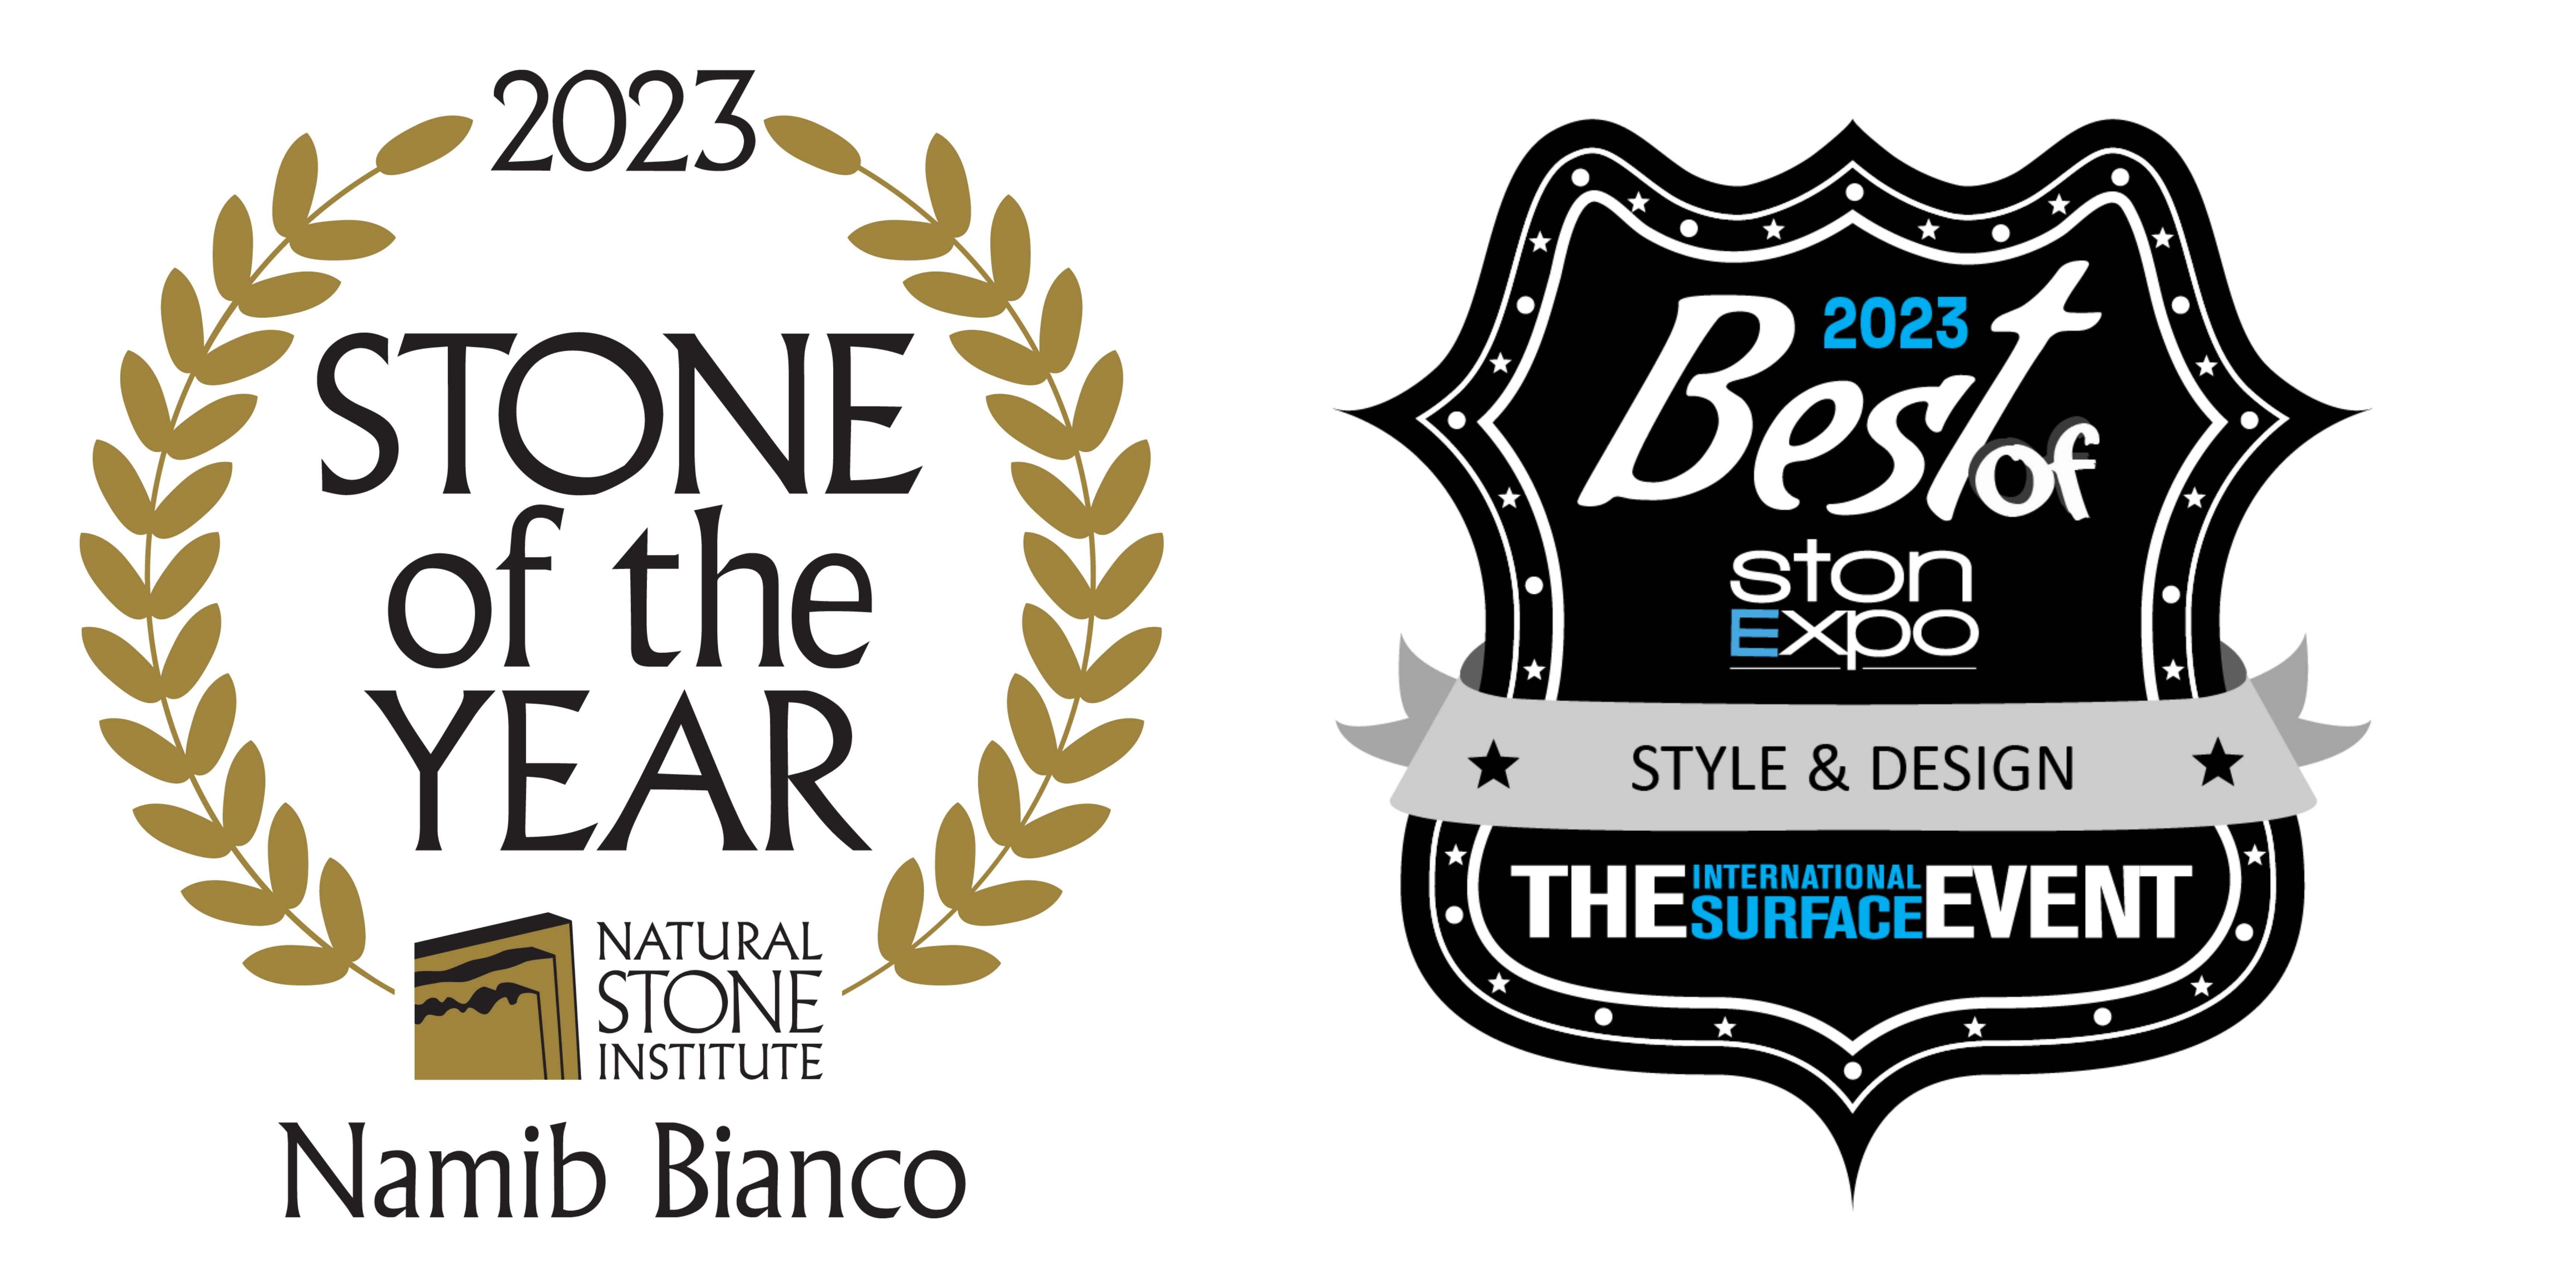 2023 awards for Stone of the Year and Best of Style and Design 